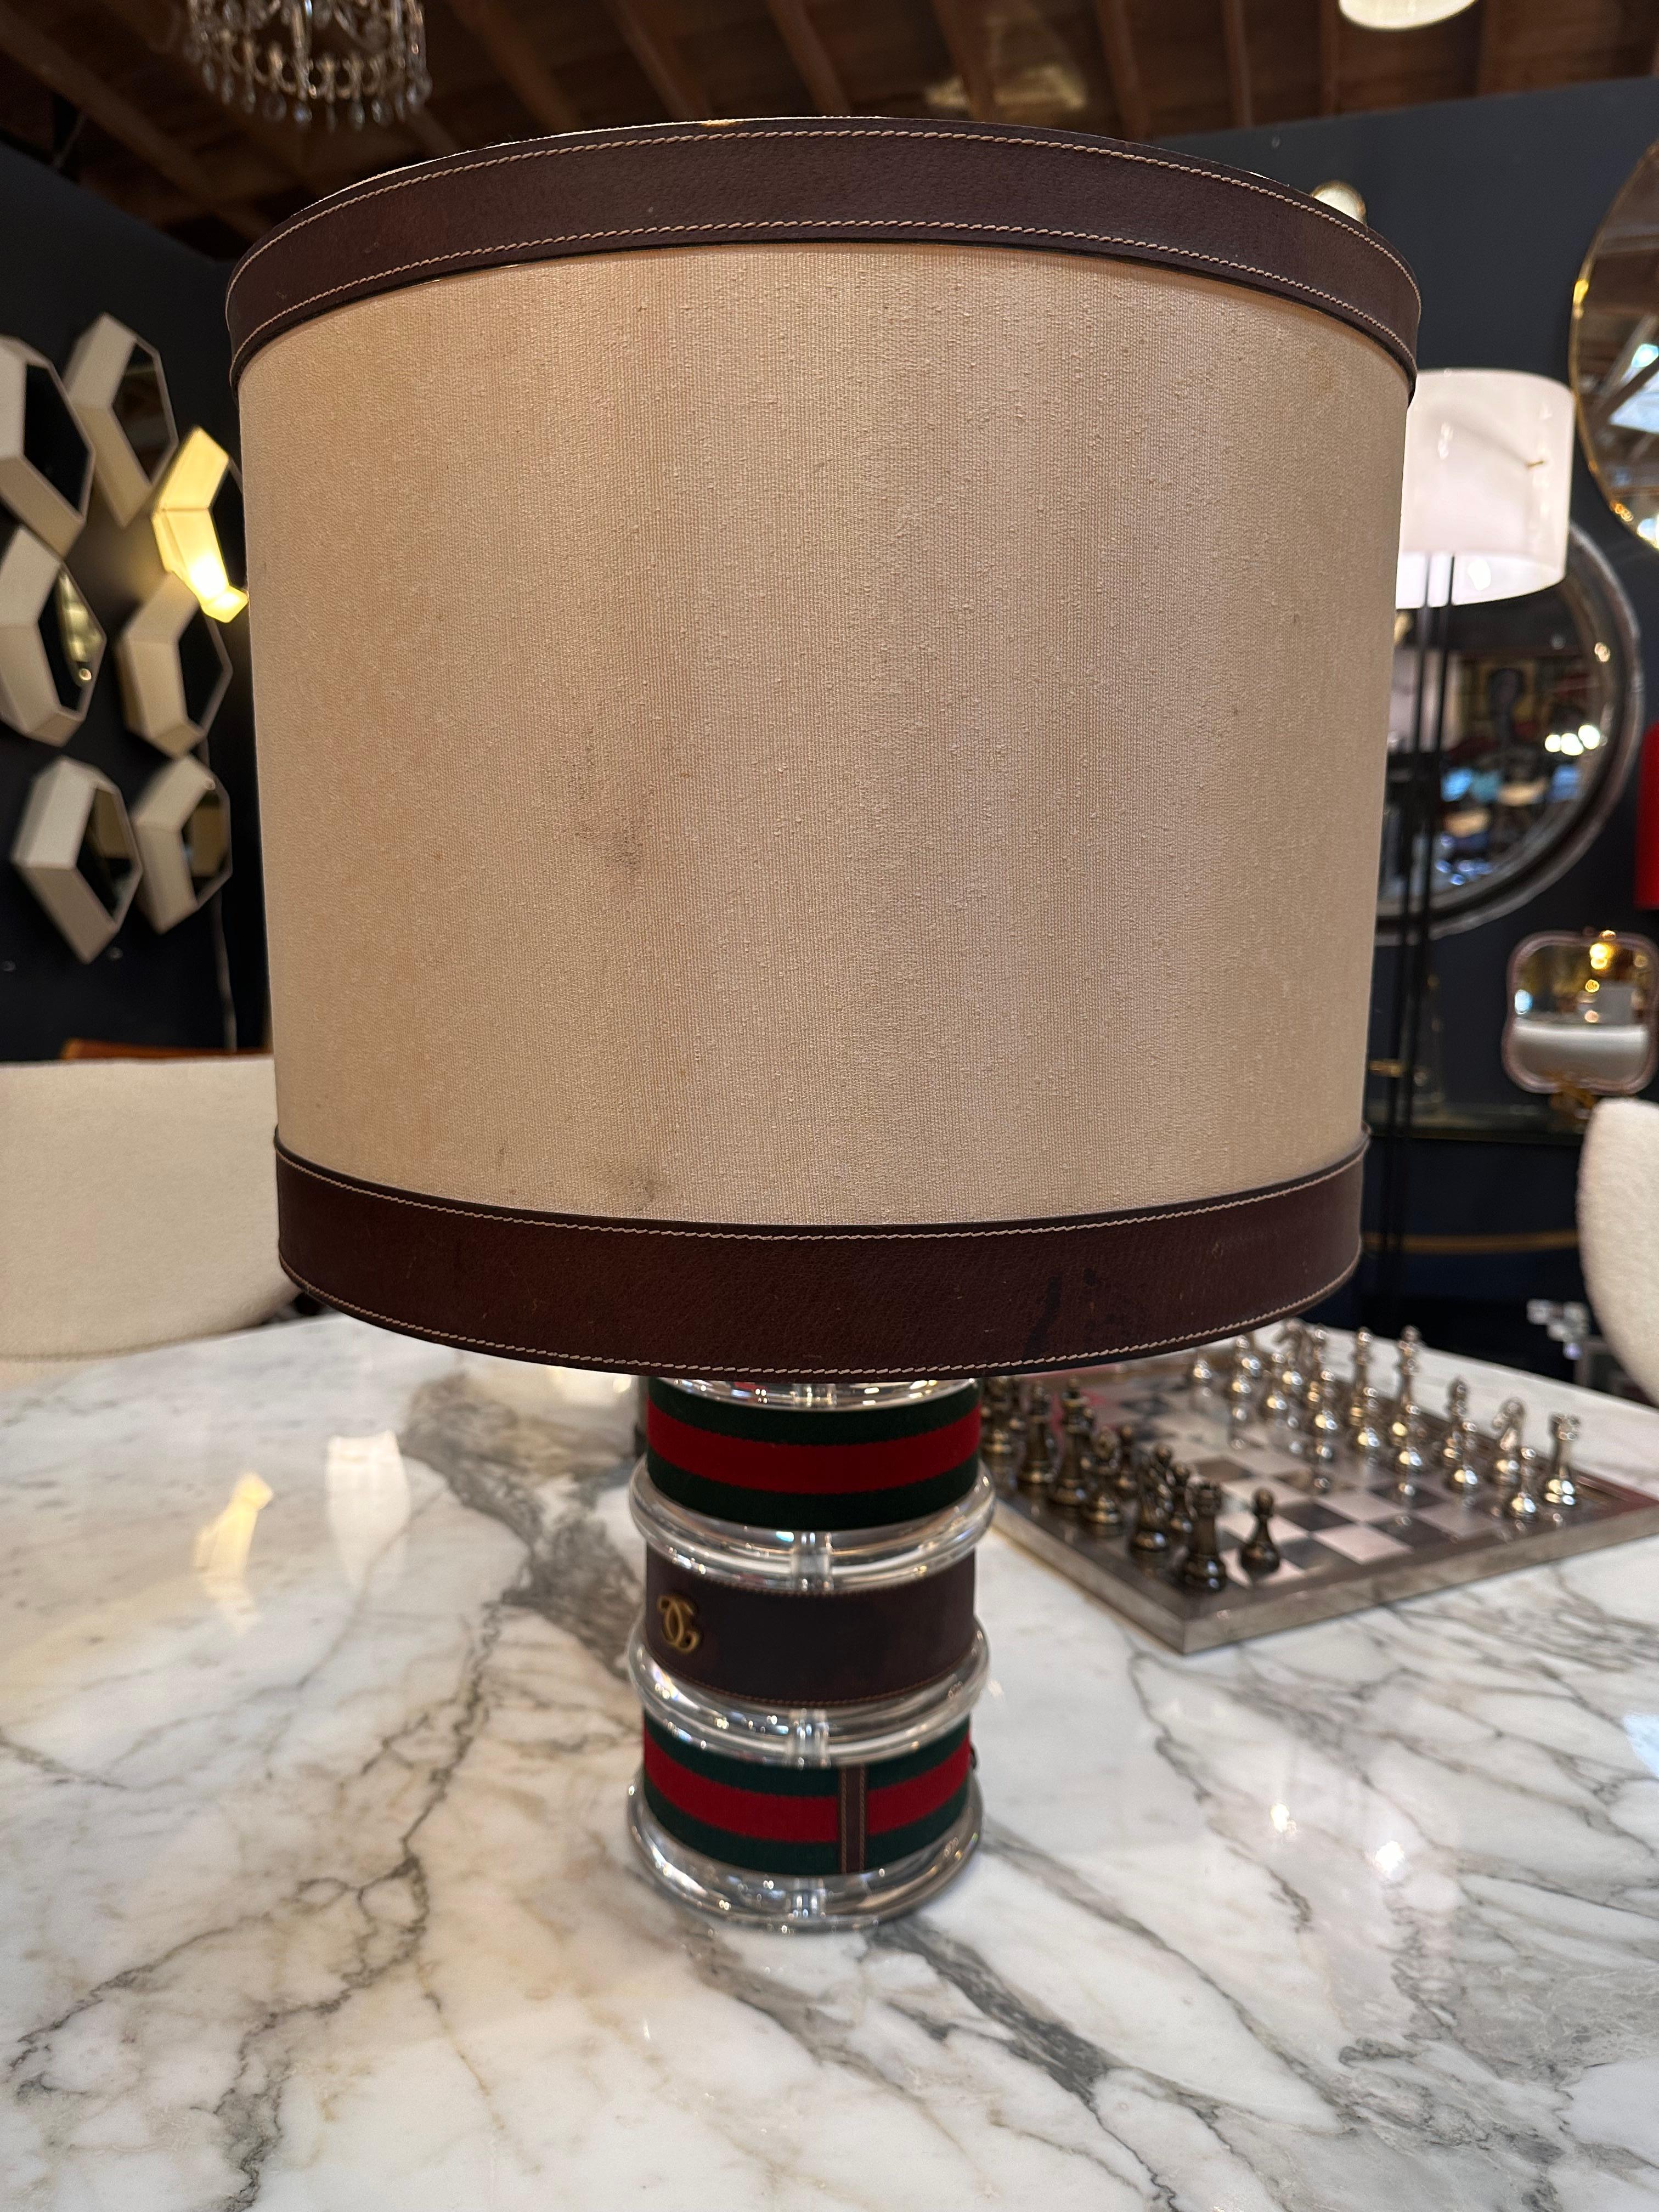 The Vintage Gucci Table Lamp from the 1970s is a unique and stylish piece that captures the essence of the era. Crafted by Gucci, this lamp features distinctive 1970s design elements, possibly incorporating luxurious materials and the iconic Gucci